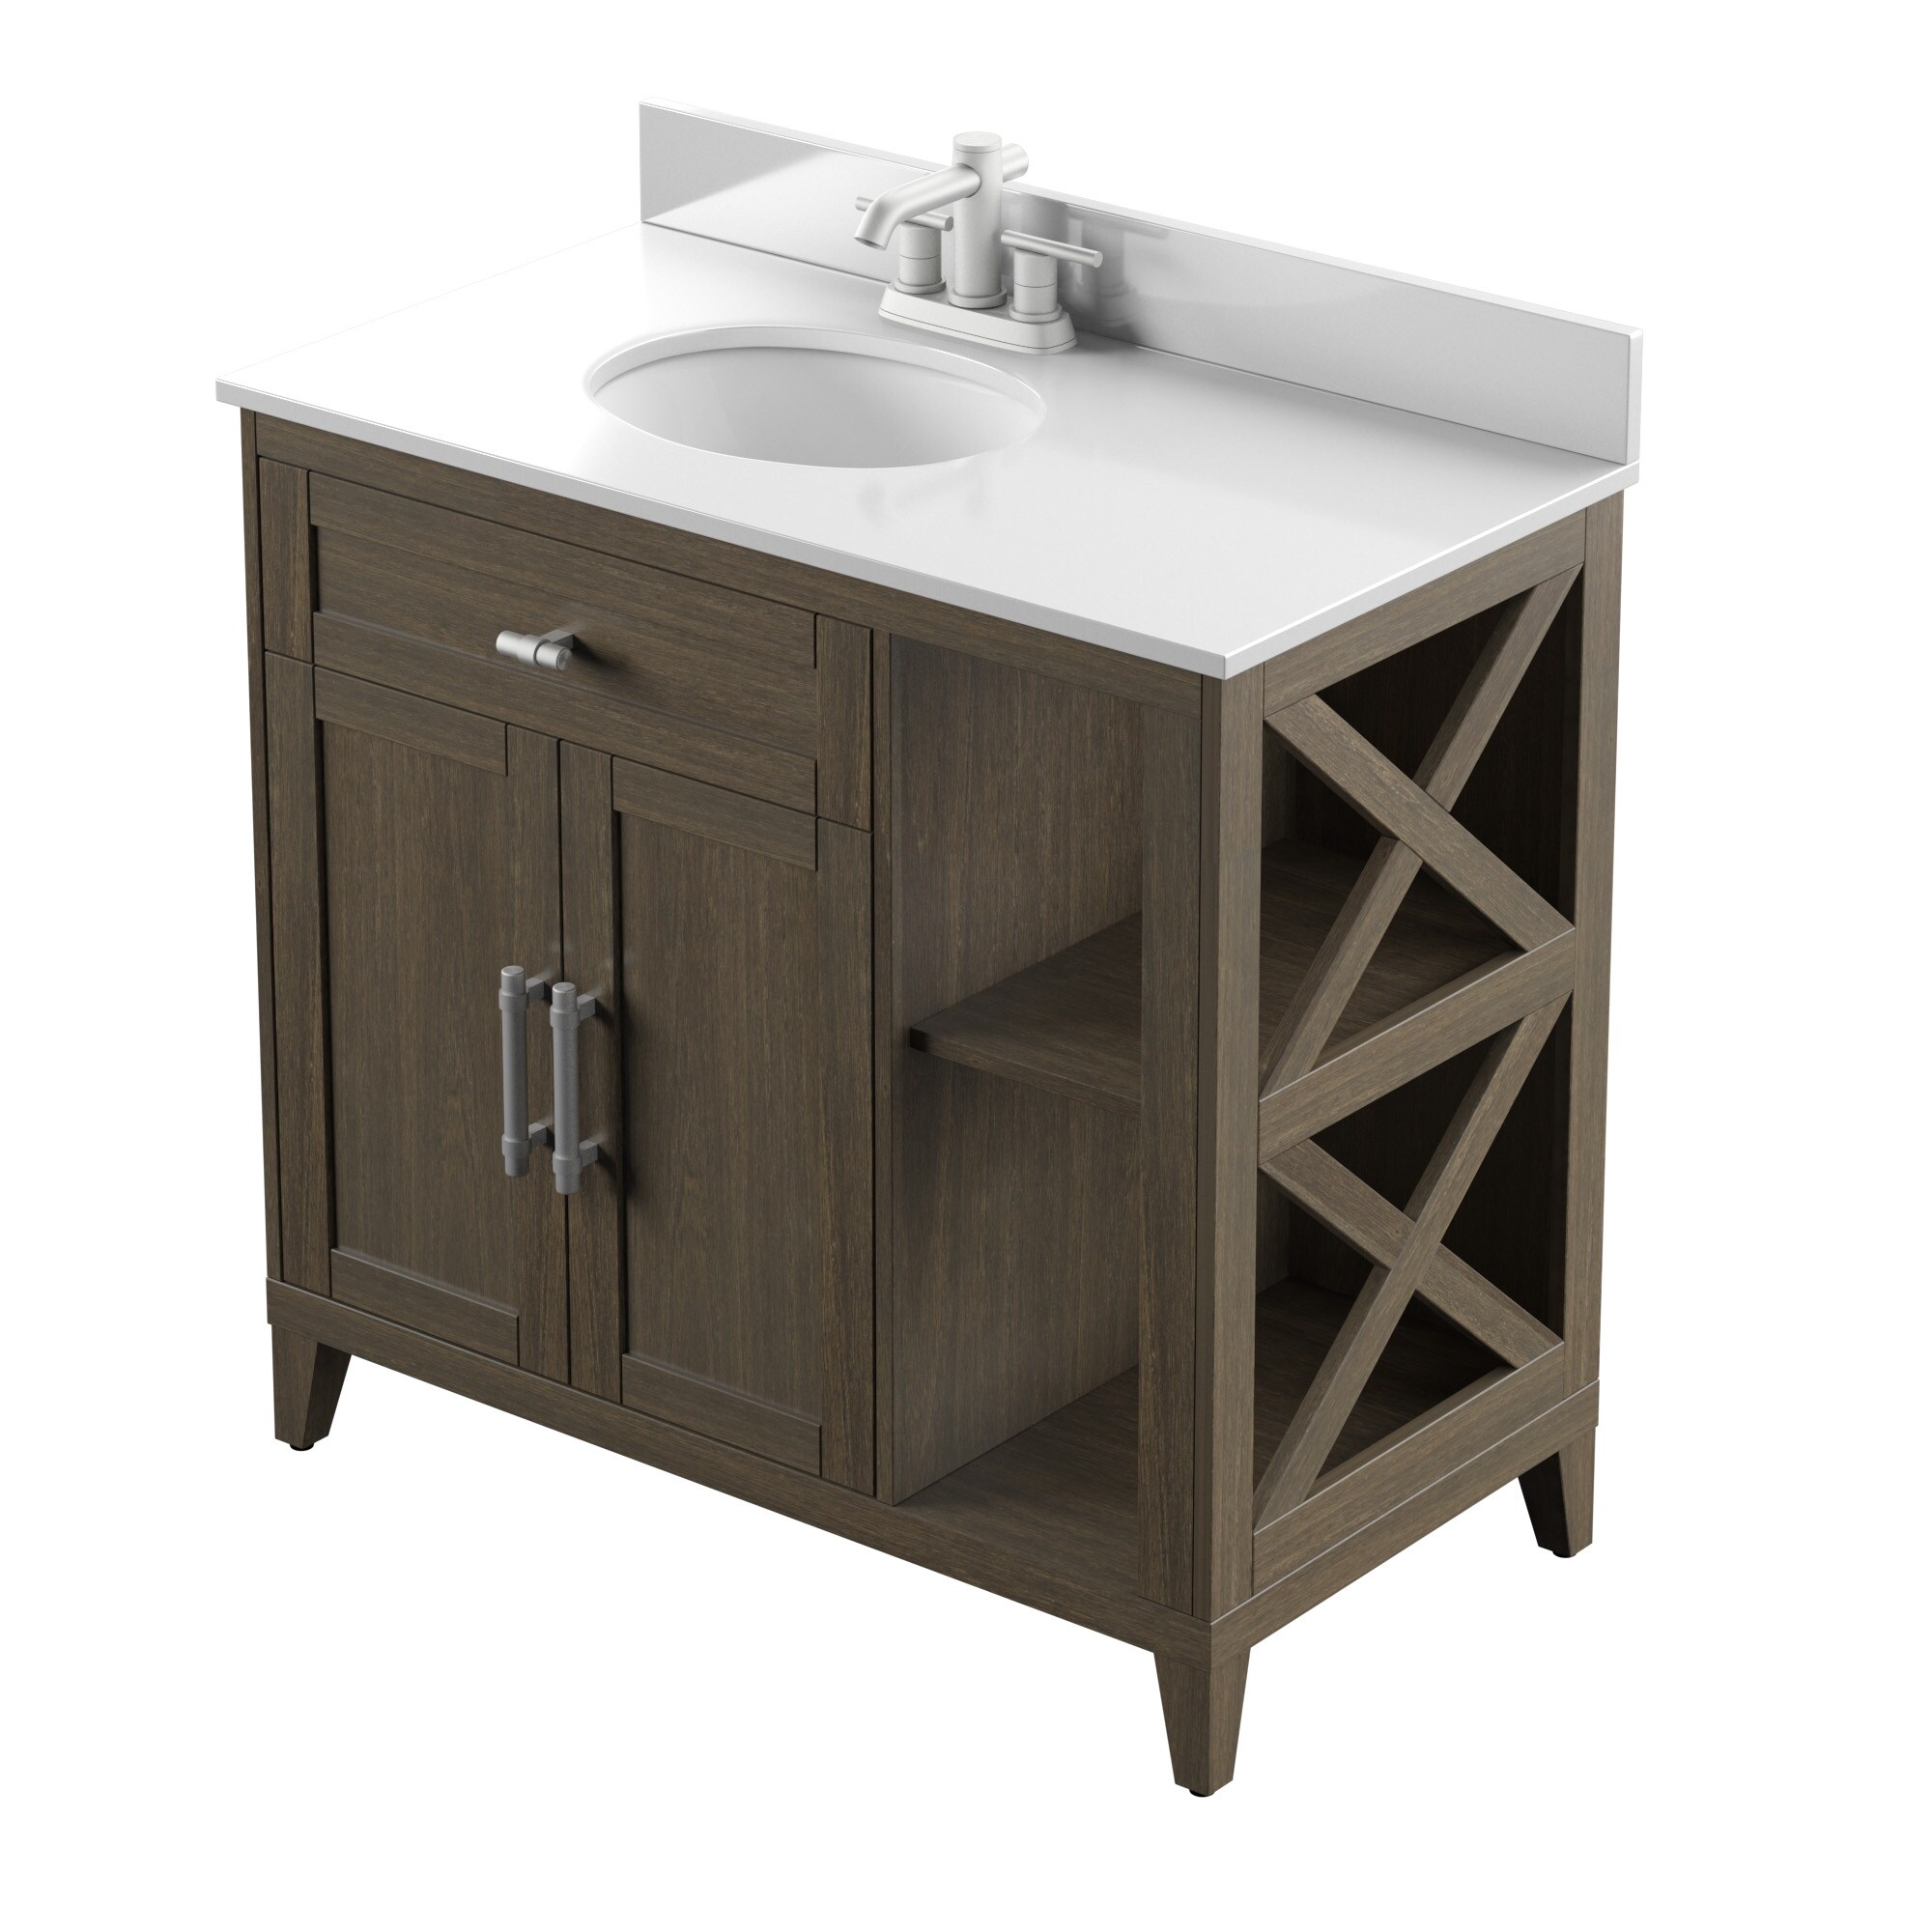 https://ak1.ostkcdn.com/images/products/is/images/direct/ad5b30710405503933c6c0c4e38c00430439807e/36%22-Bathroom-Vanity-with-Open-X-Shelves.jpg